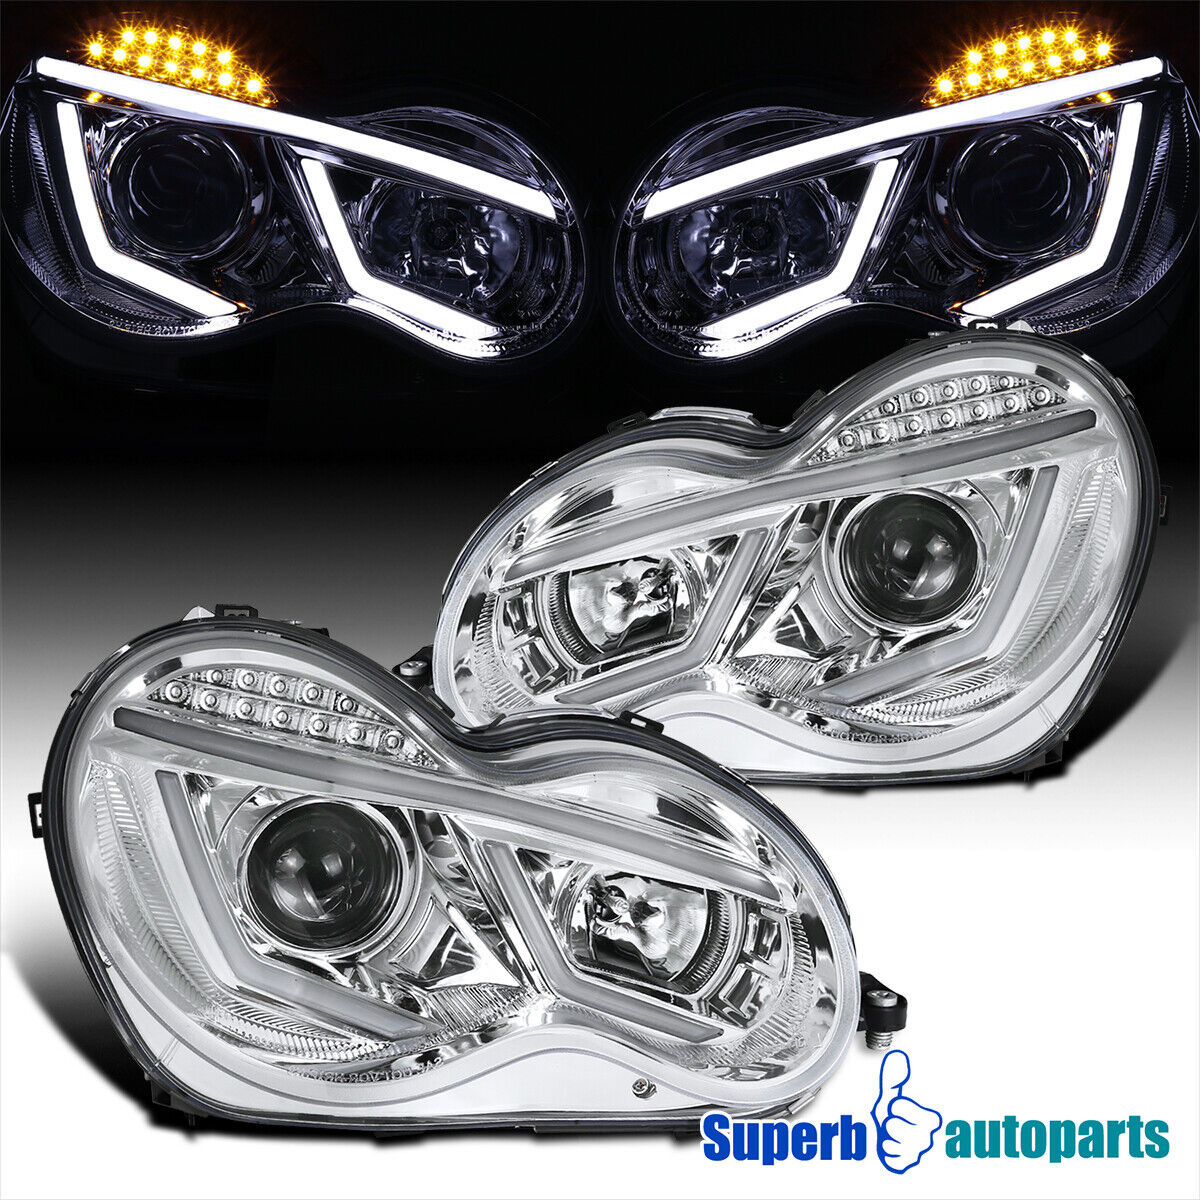 Fits 2001-2007 Benz W203 C-Class Projector Headlights W/ LED Signal Lamps Pair